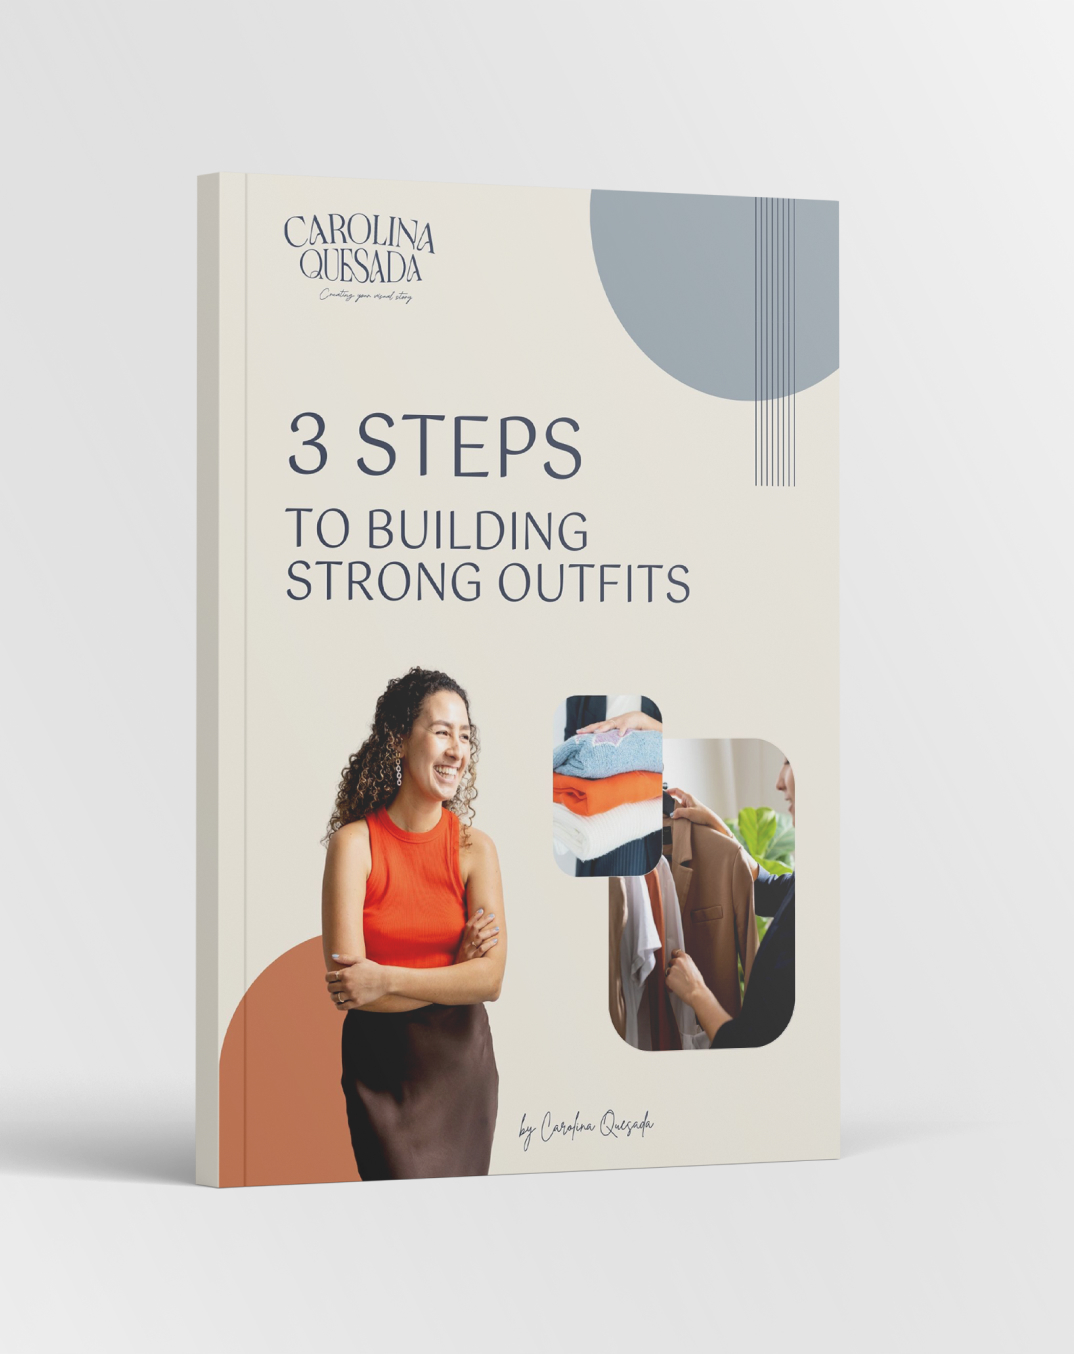 Image of the cover of the book 3 steps to building strong outfits by Carolina Quesada